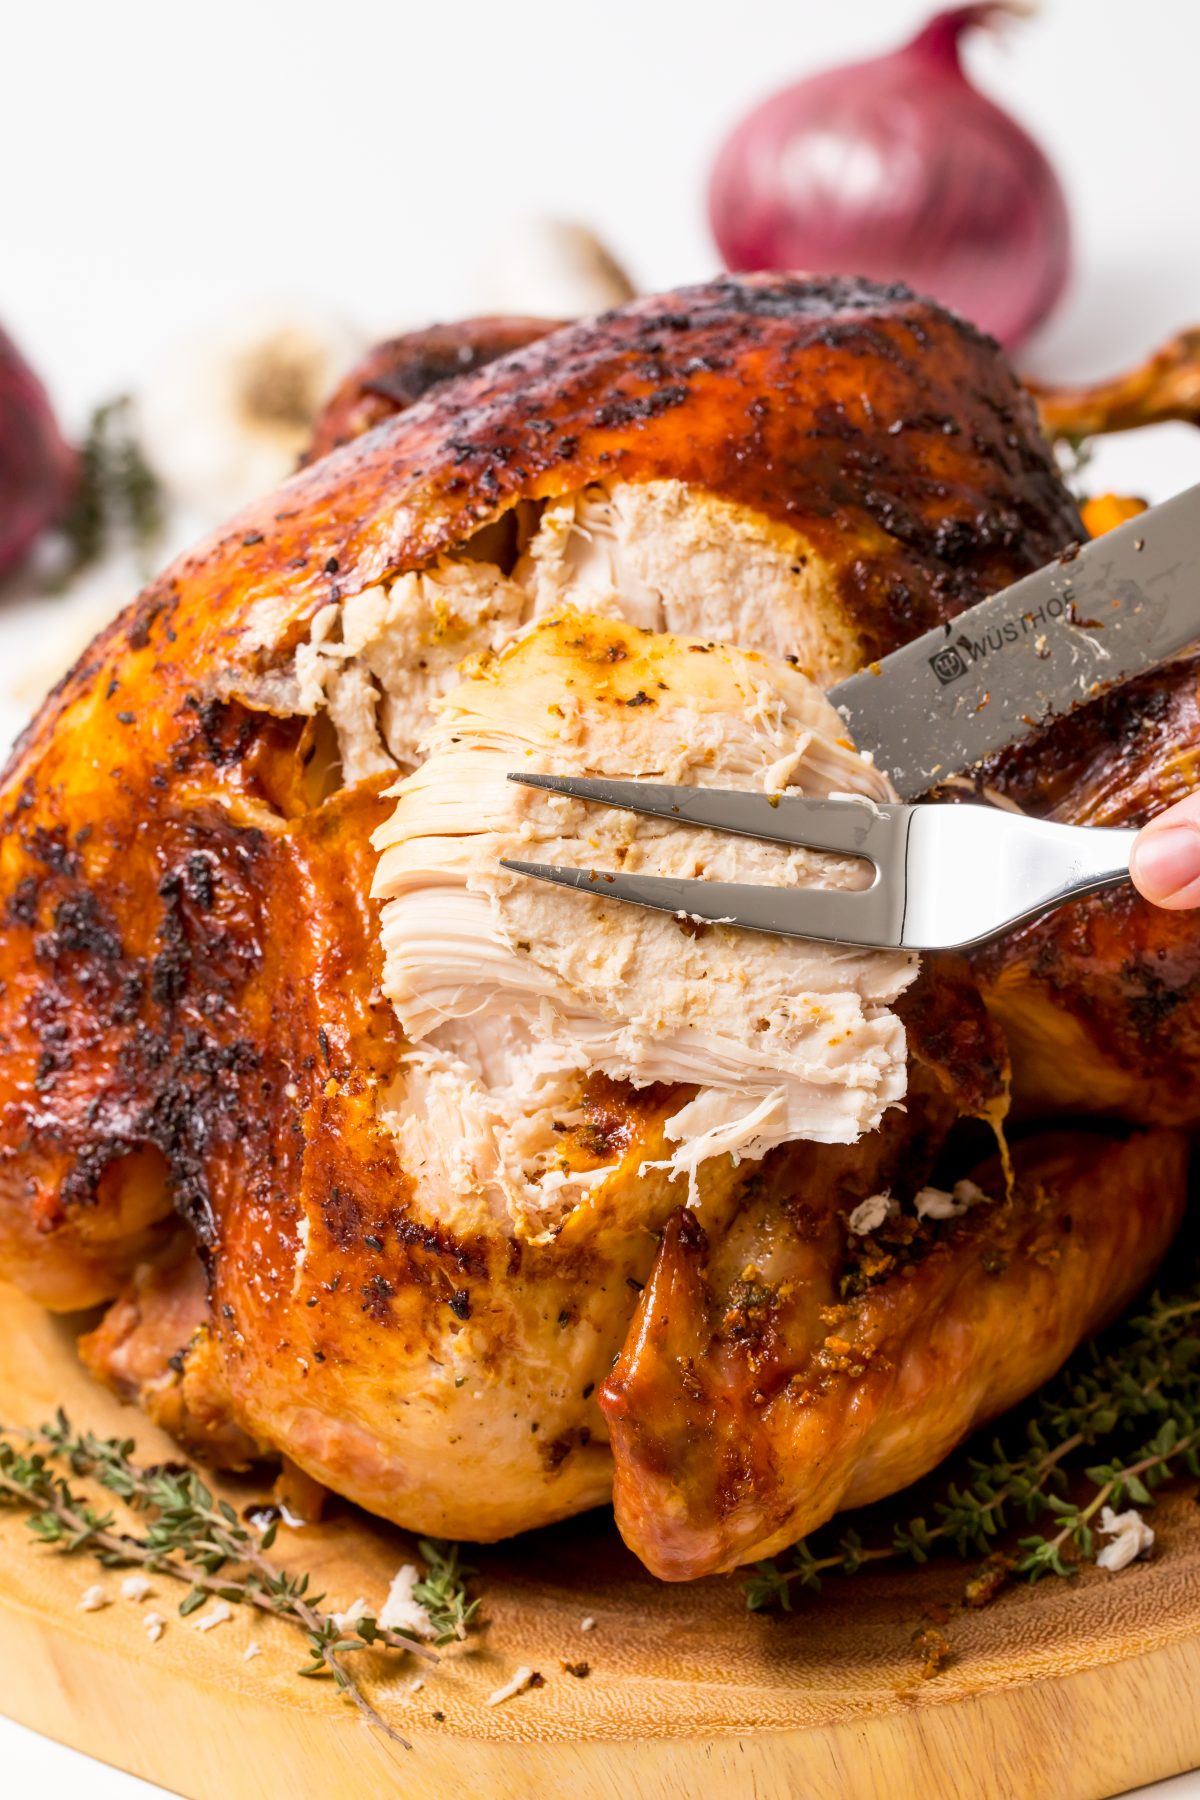 5D4B7718 - Orange Anise and Thyme Turkey. Just carve and serve!